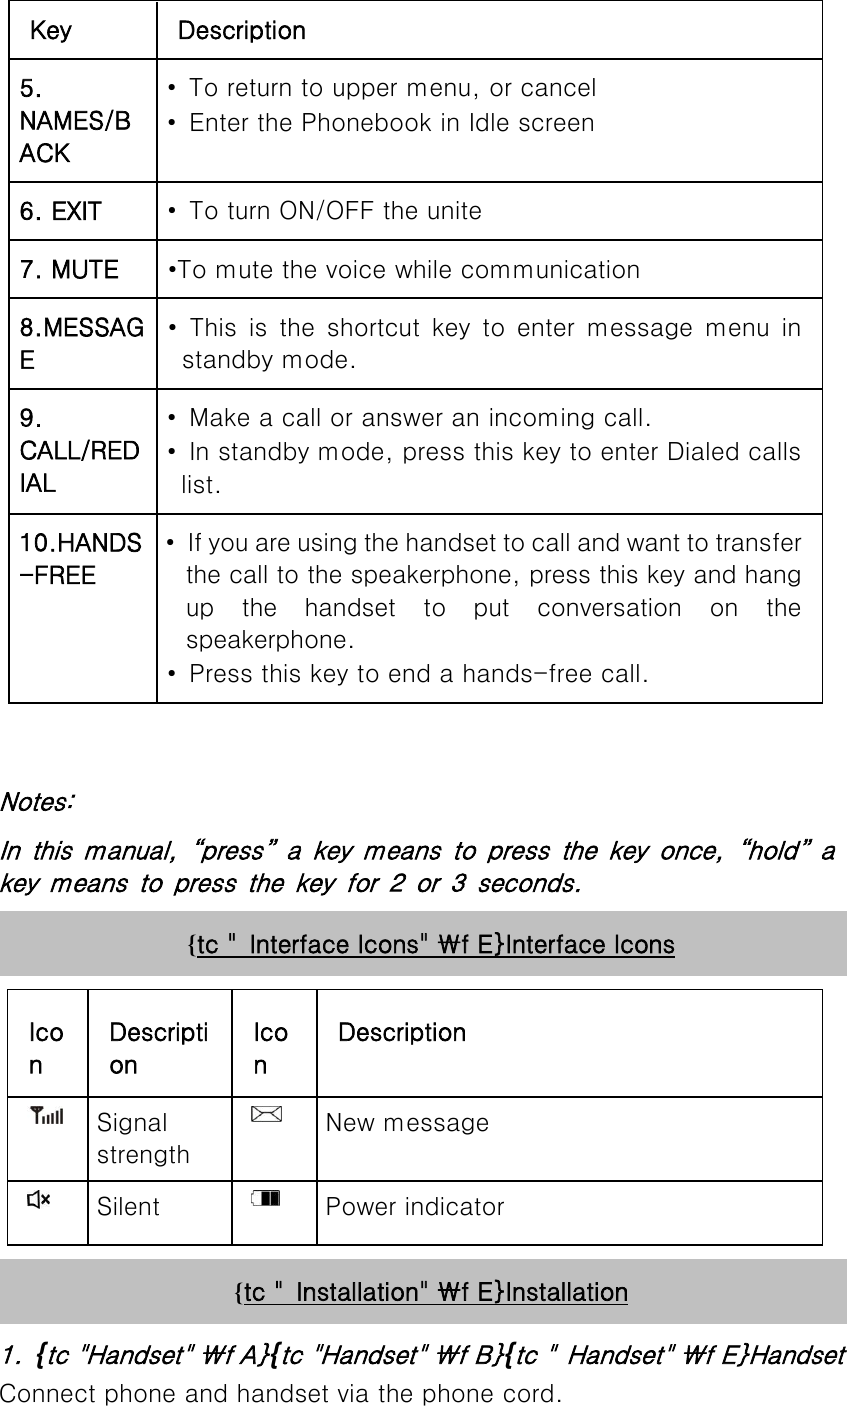 Key Description 5. NAMES/BACK •  To return to upper menu, or cancel •  Enter the Phonebook in Idle screen 6. EXIT •  To turn ON/OFF the unite 7. MUTE •To mute the voice while communication 8.MESSAGE •  This  is  the  shortcut  key  to  enter  message  menu  in standby mode. 9. CALL/REDIAL •  Make a call or answer an incoming call. •  In standby mode, press this key to enter Dialed calls list. 10.HANDS-FREE •  If you are using the handset to call and want to transfer the call to the speakerphone, press this key and hang up  the  handset  to  put  conversation  on  the speakerphone.   •  Press this key to end a hands-free call.  Notes: In  this  manual,  “press”  a  key  means  to  press  the  key  once,  “hold” a   key  means  to  press  the  key  for  2  or  3  seconds. {tc &quot;  Interface Icons&quot; \f E}Interface Icons Icon Description Icon Description  Signal strength  New message    Silent  Power indicator {tc &quot;  Installation&quot; \f E}Installation 1. {tc &quot;Handset&quot; \f A}{tc &quot;Handset&quot; \f B}{tc &quot;  Handset&quot; \f E}Handset Connect phone and handset via the phone cord. 